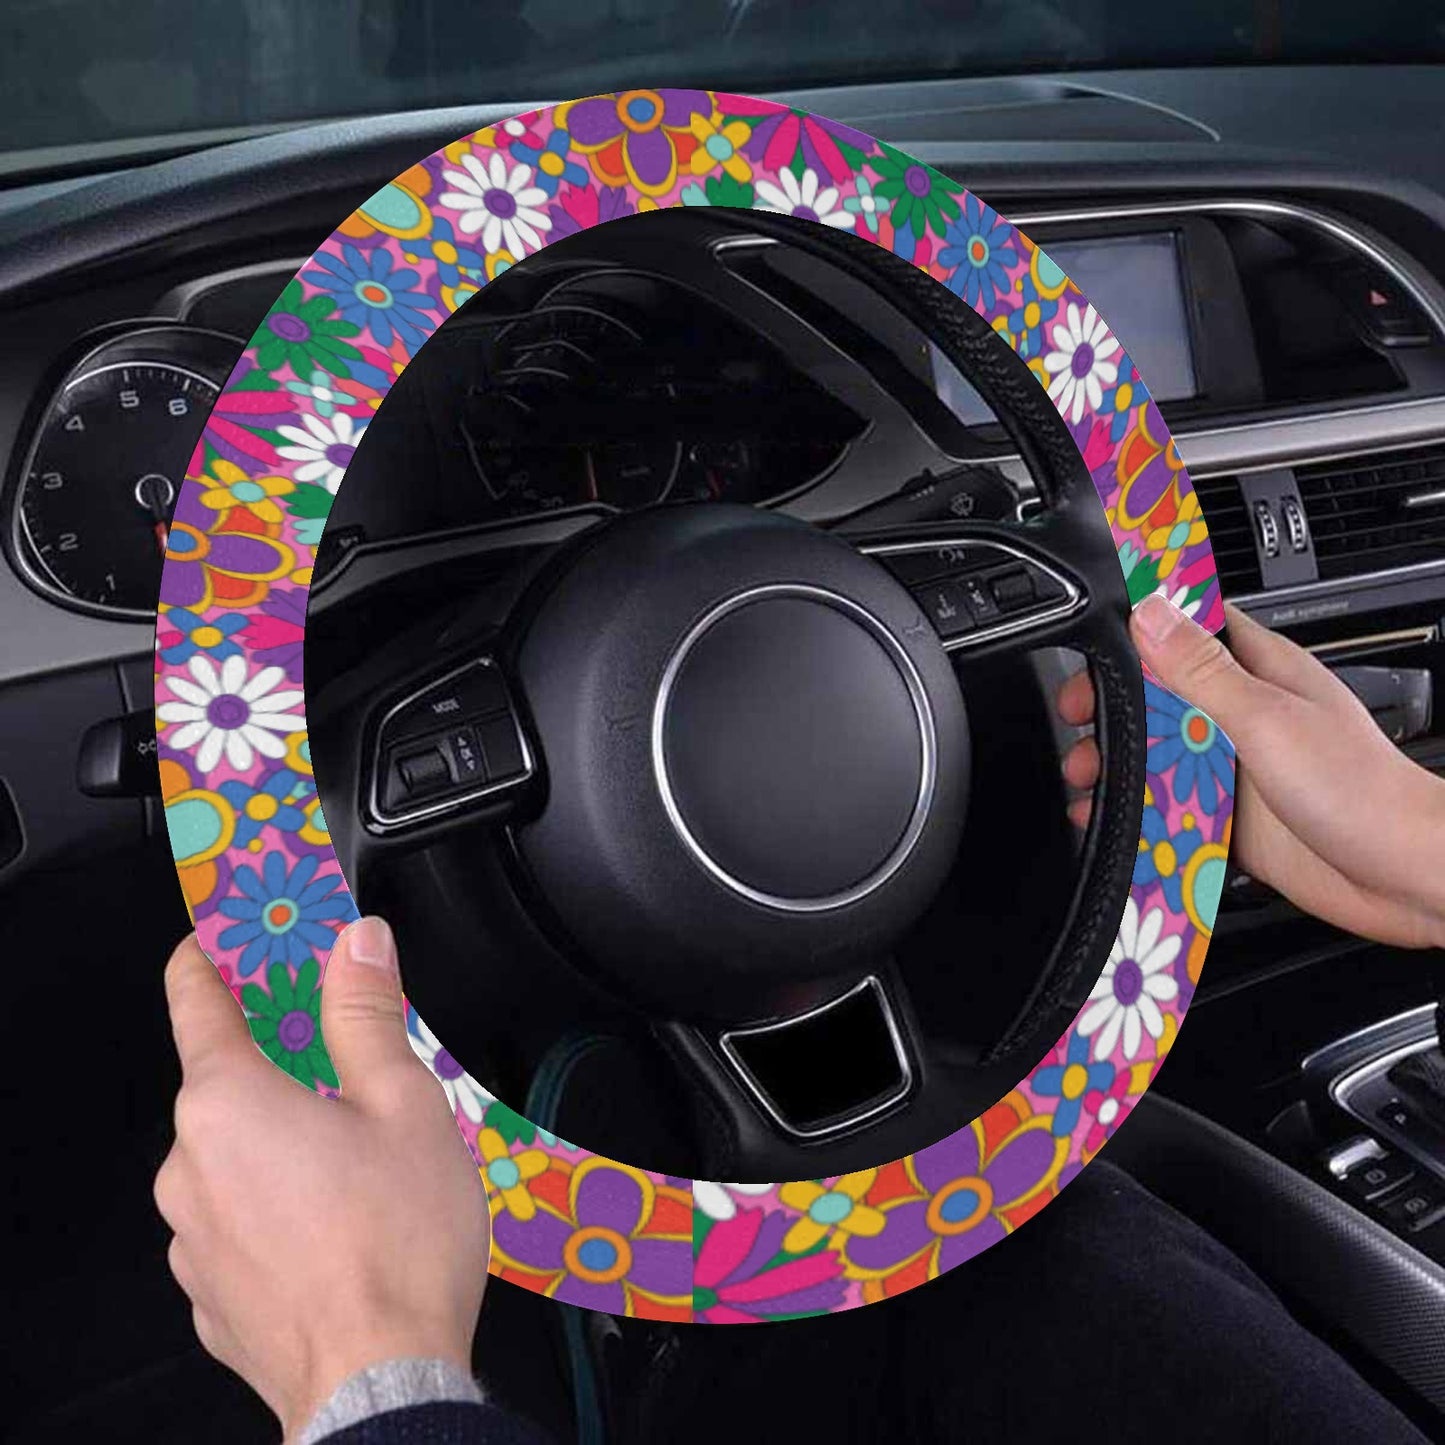 Retro Hippie Floral Steering Wheel Cover, Groovy Cute 70s Flowers Women Pink Print Car Auto Wrap Anti-Slip Insert Protector Accessories Starcove Fashion